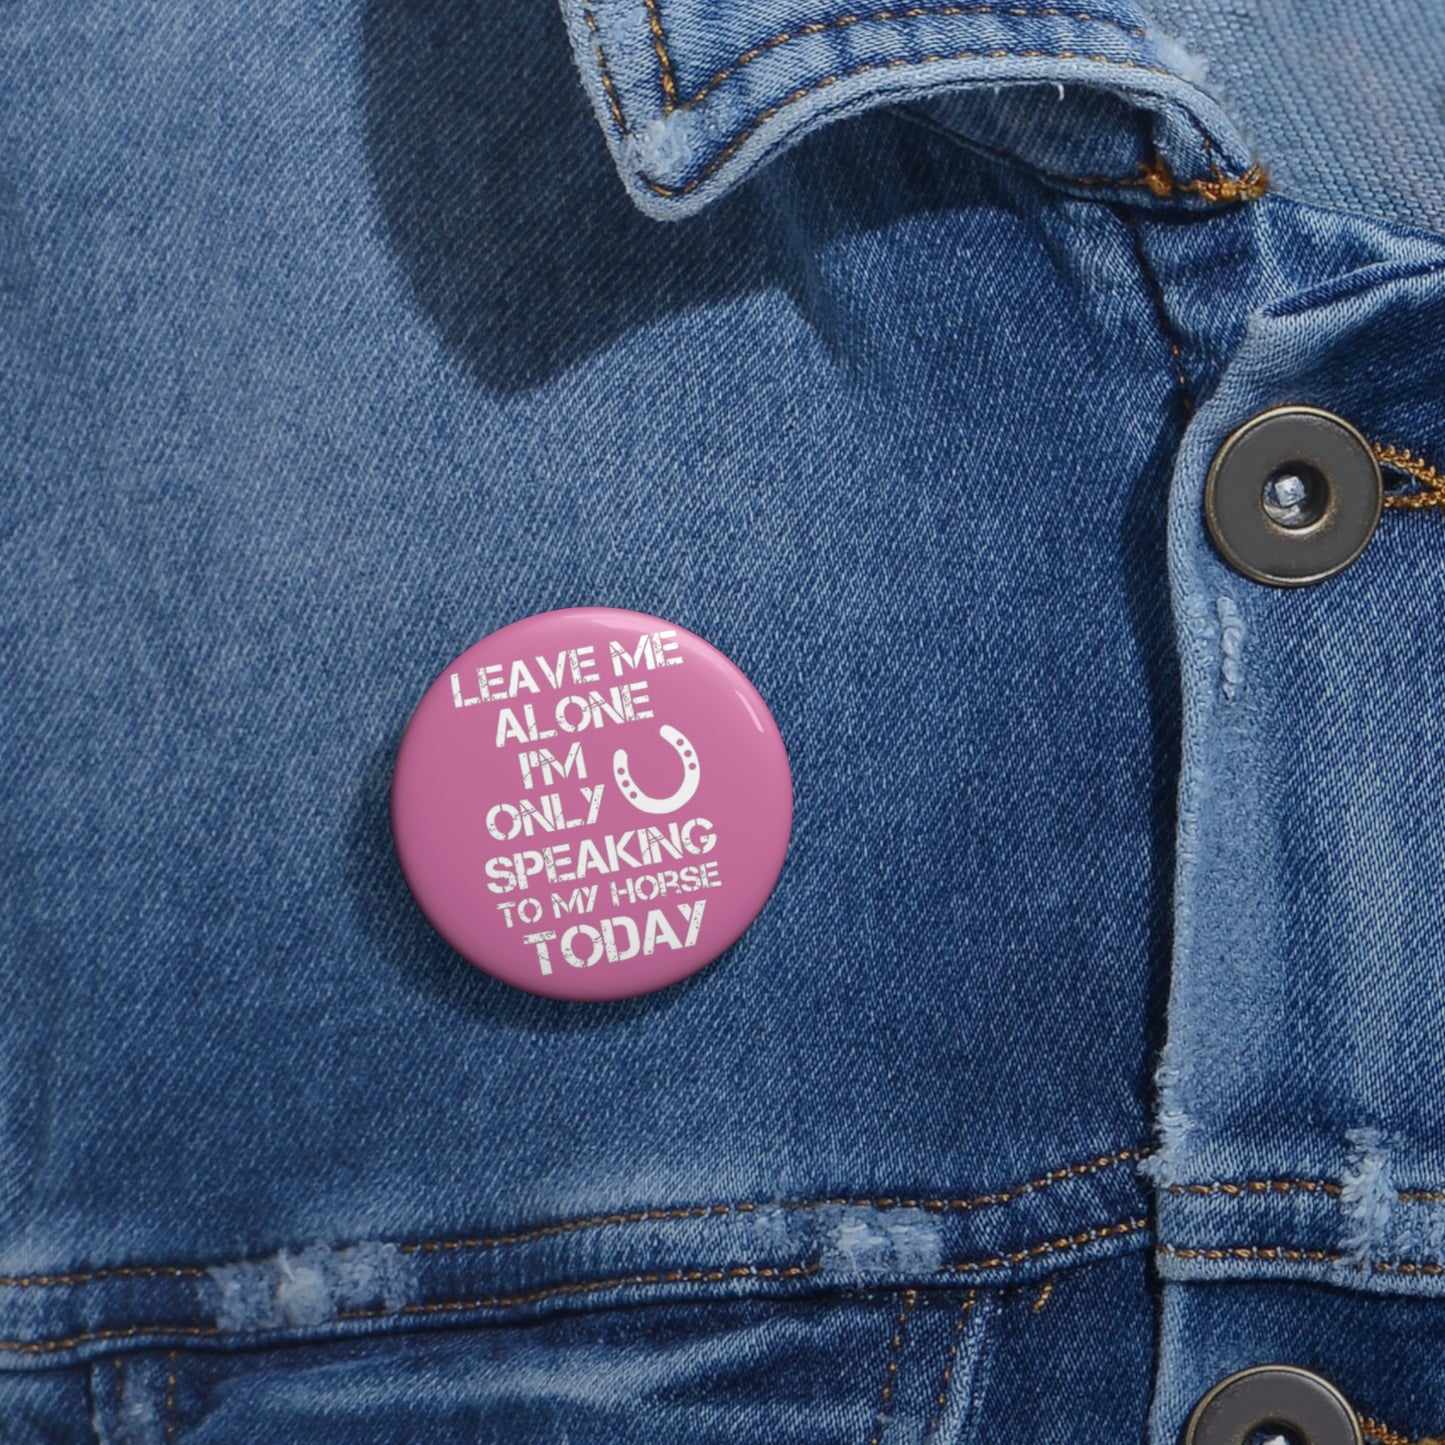 Leave Me Alone - Custom Pin Buttons - Pink / White